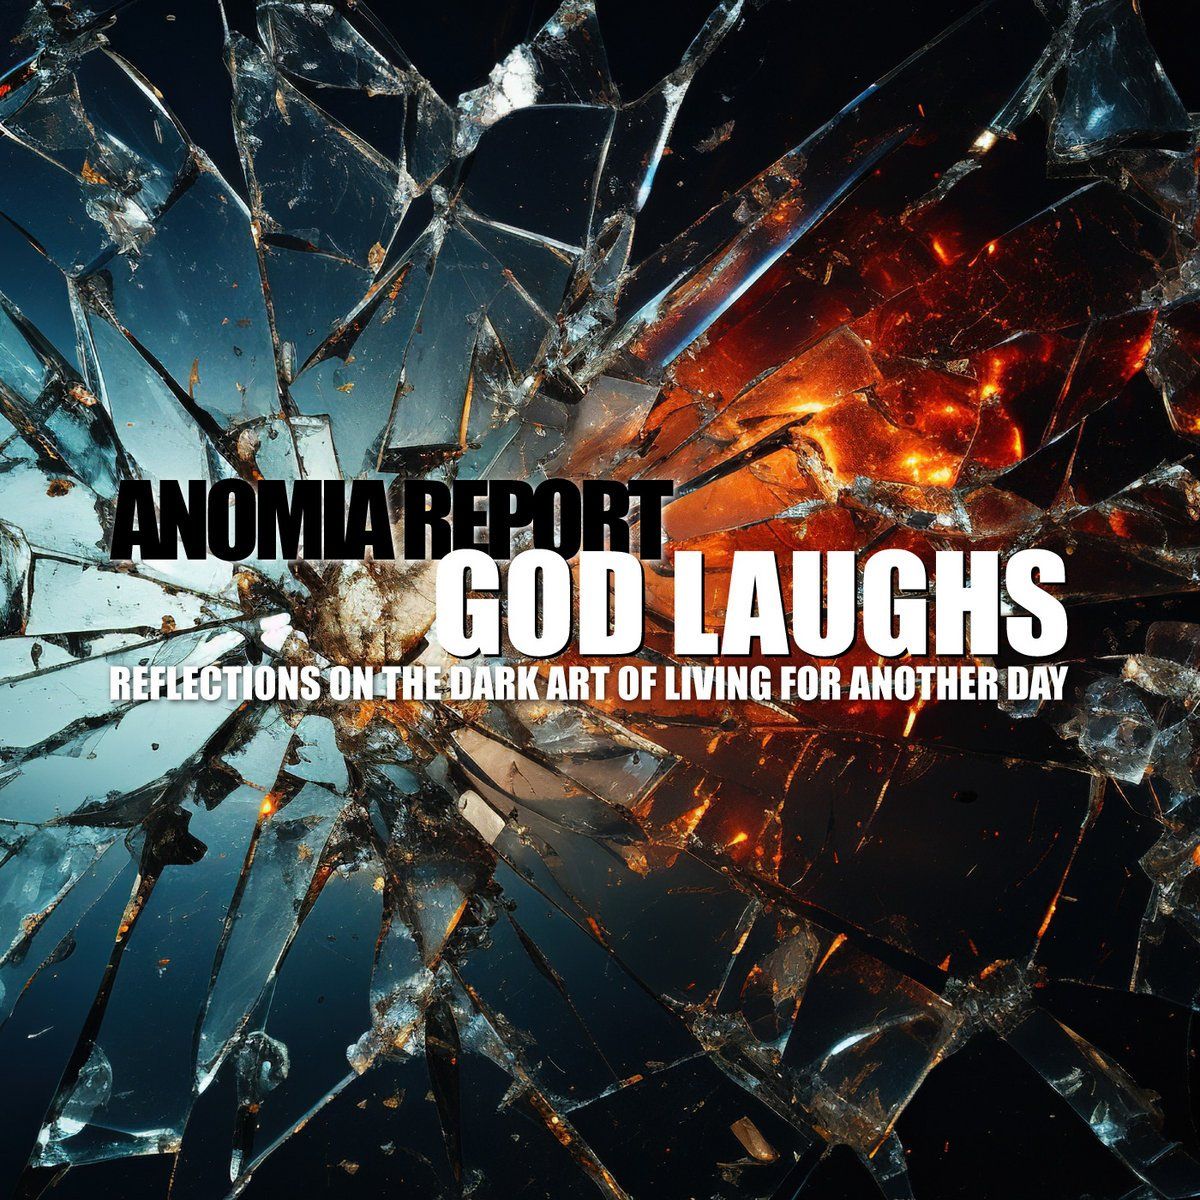 Listen to Chicago Outfit Anomia Report’s Latest LP “God Laughs: Reflections on the Dark Art of Living for Another Day”